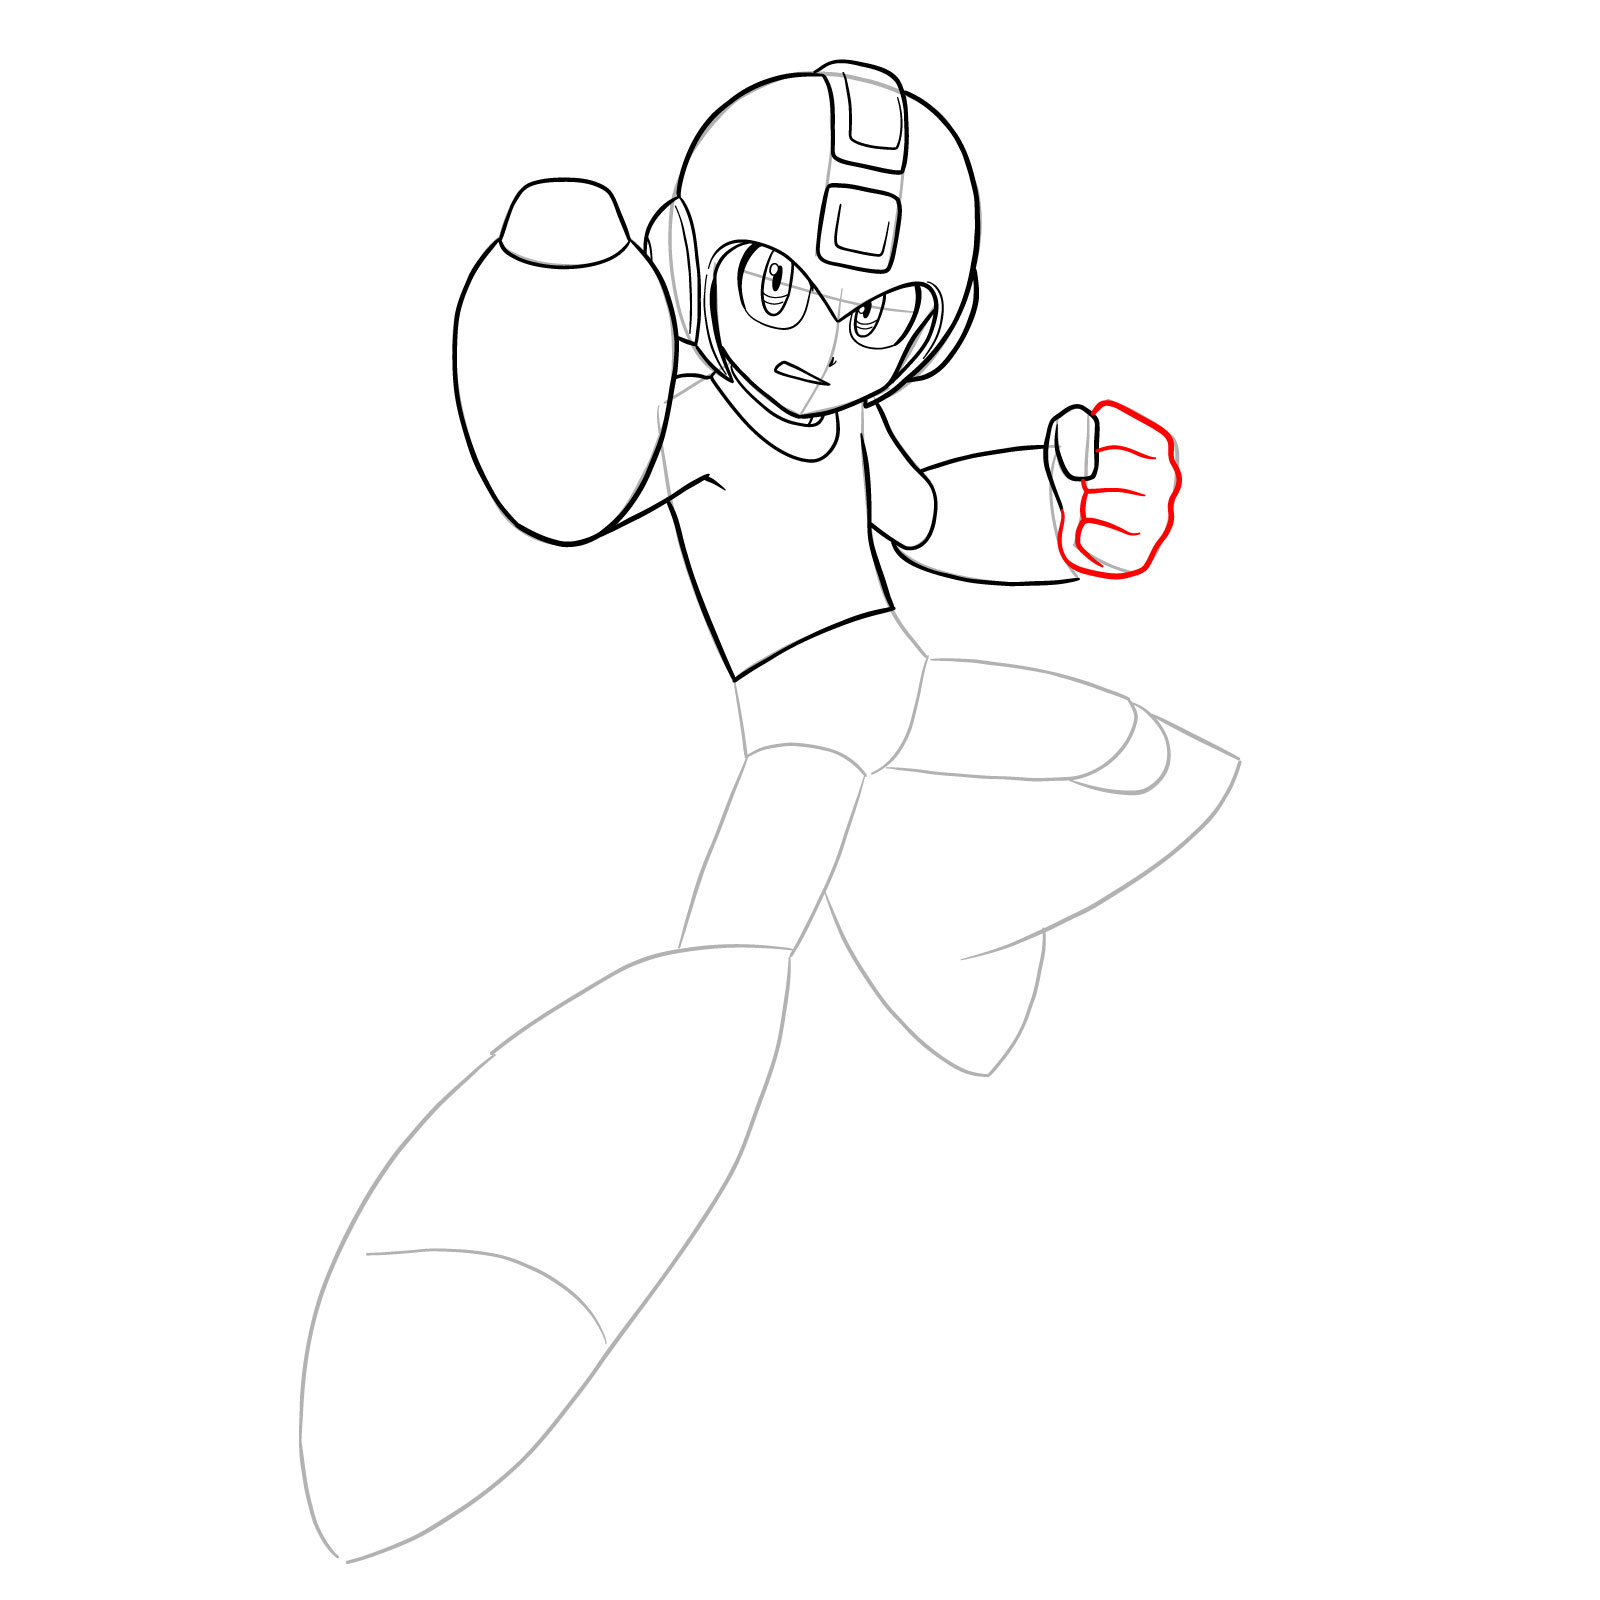 How to draw Mega Man from the 11th game - step 19